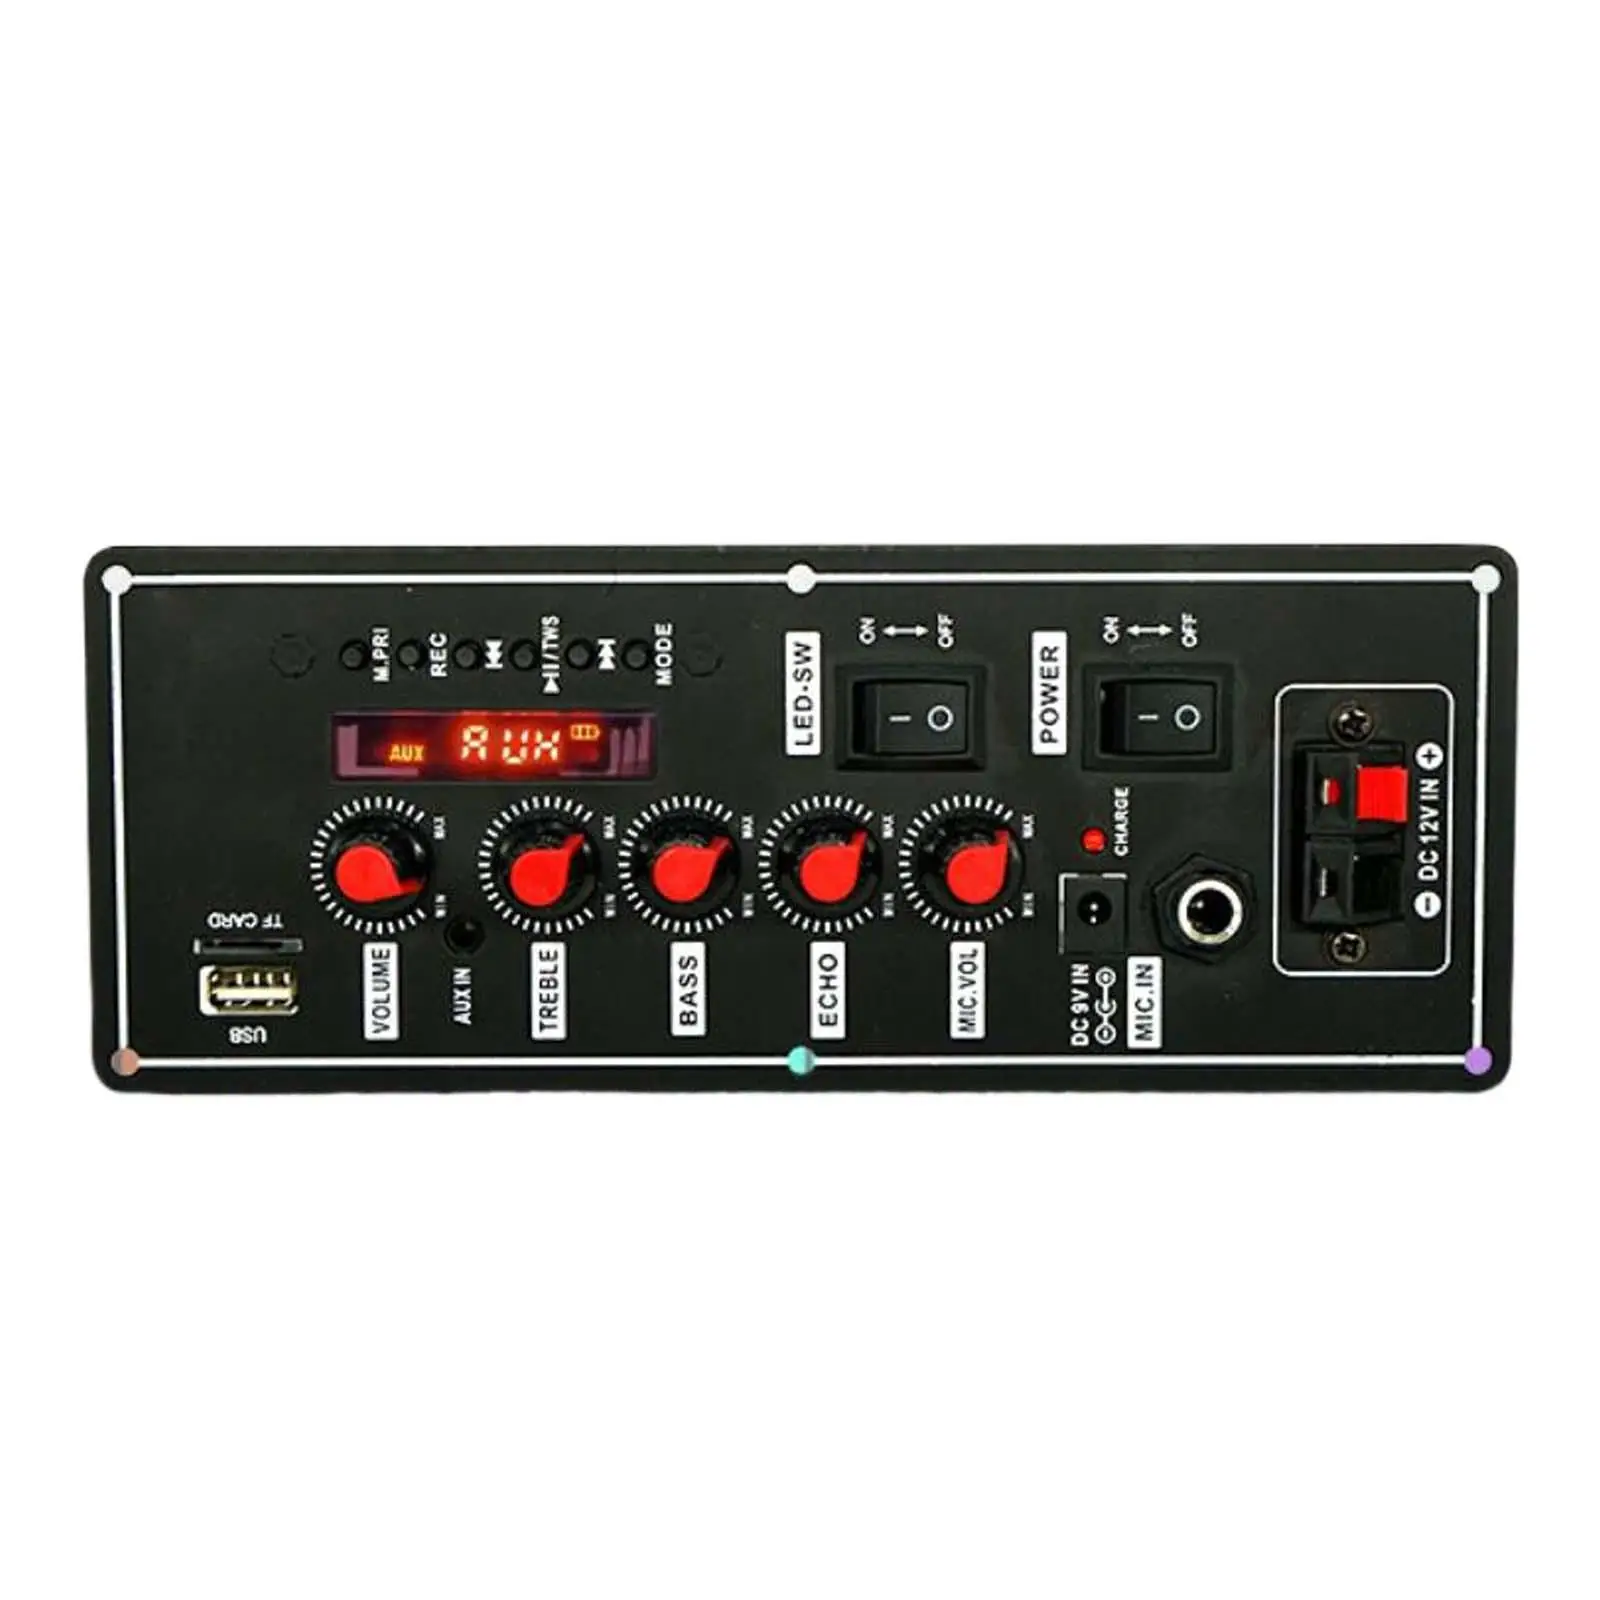 MP3 Decoding Board with Treble and Bass Adjustment Knob Support MP3/WMA/WAV/flac/ape Audio Receiver Module Easy to Operate